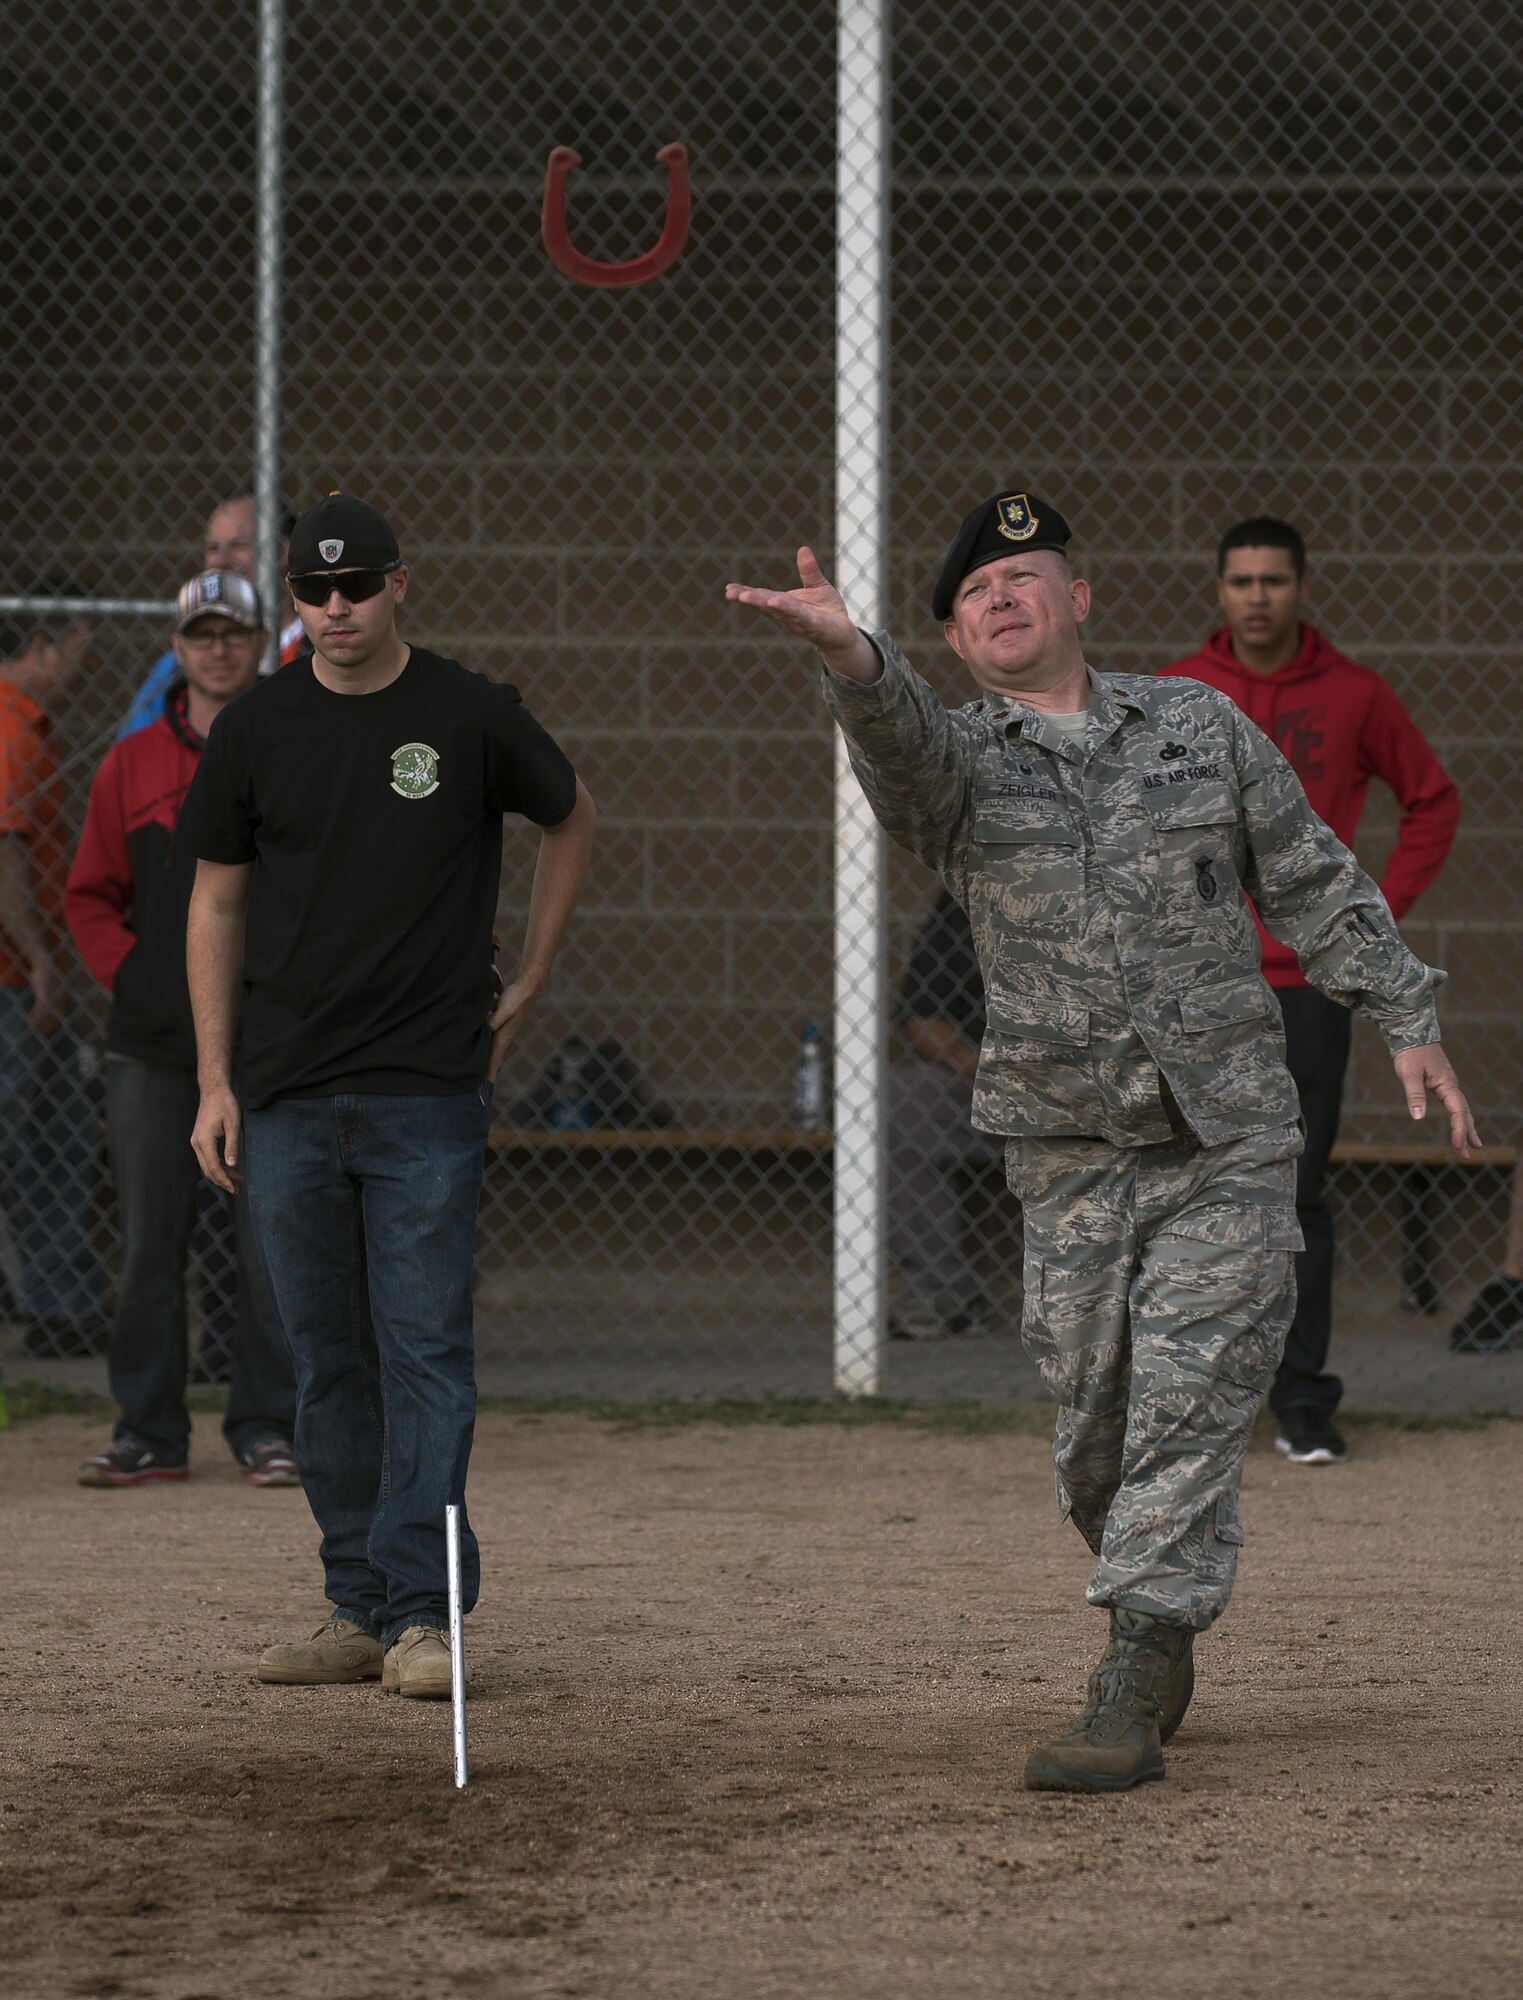 Maj. Richard Ziegler, 90th Security Forces Squadron commander, tosses a horseshoe during the annual Frontiercade competition at F.E. Warren Air Force Base, Wyo., Aug. 19, 2016. The horseshoe competition was one of 10 competitions that Airmen and their families competed in. (U.S. Air Force photo by Senior Airman Brandon Valle)